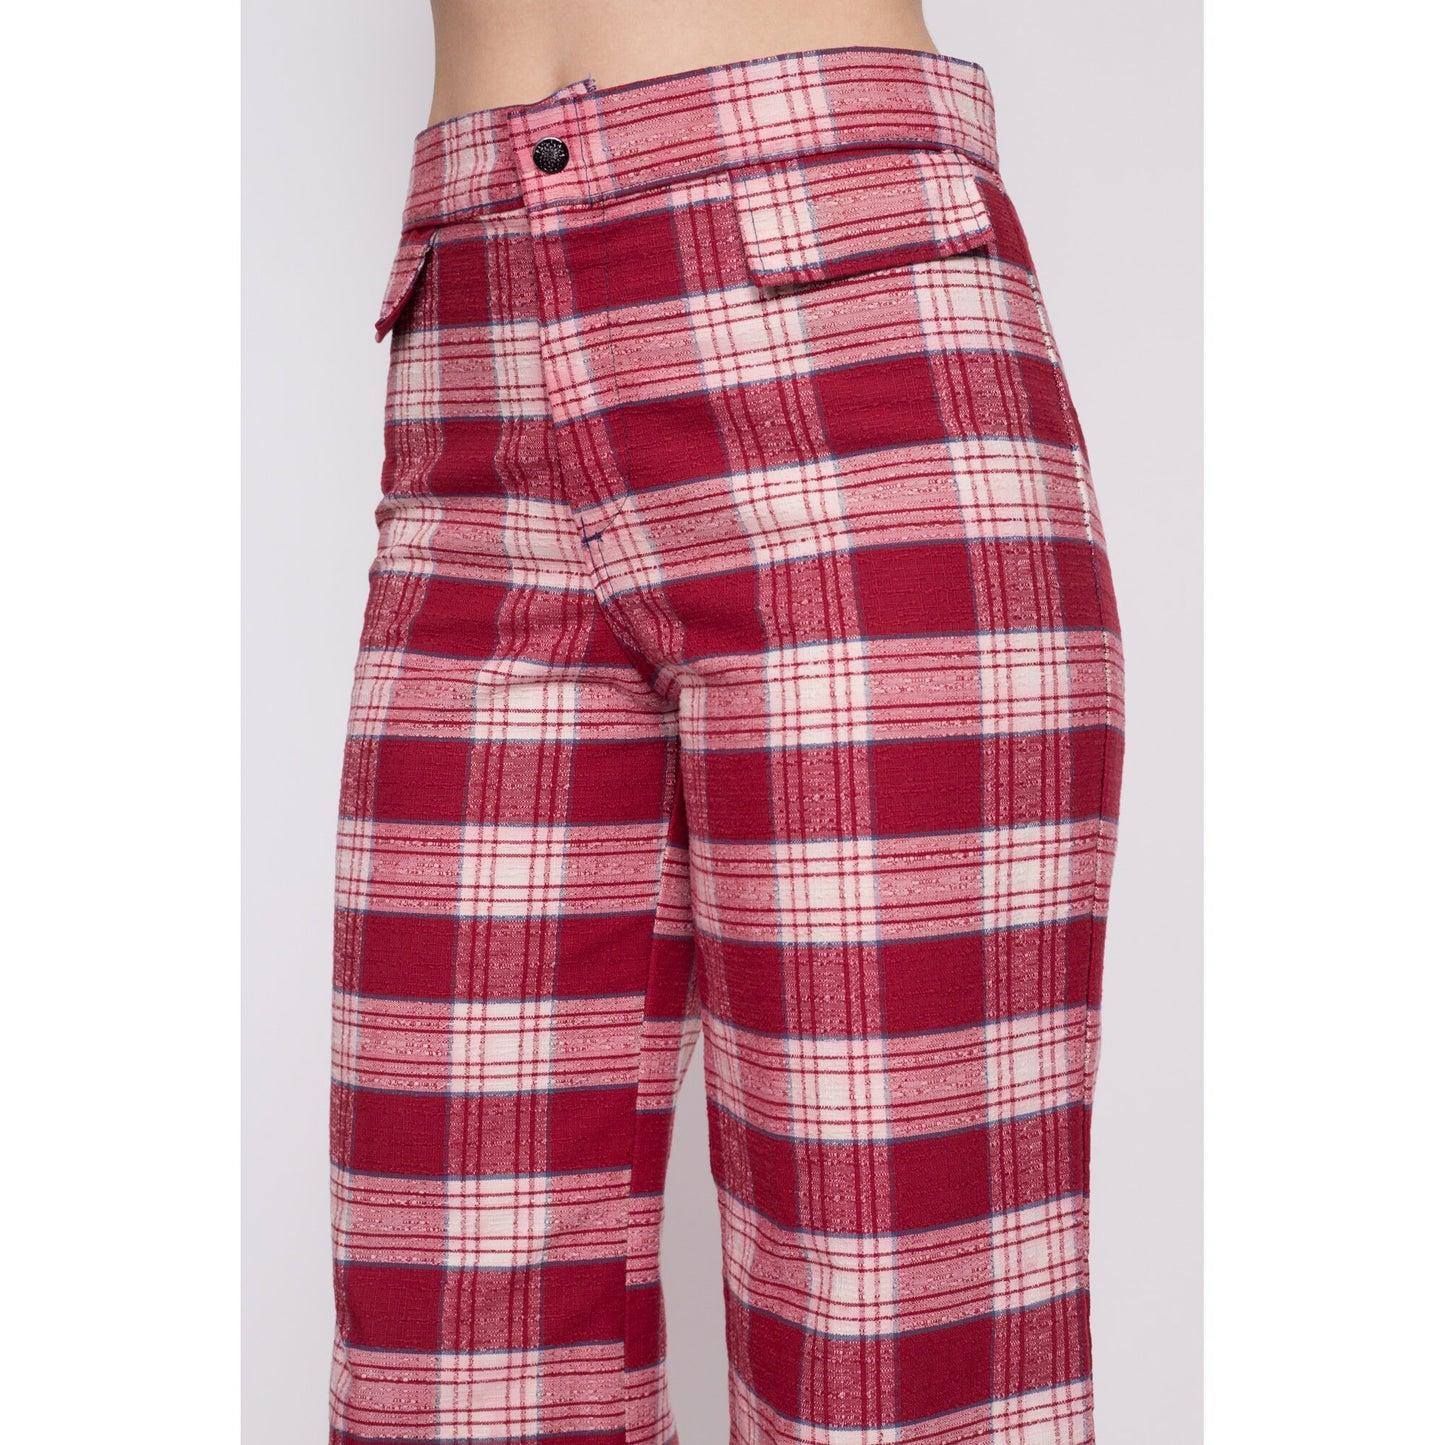 70s Red Plaid High Waisted Pants - Men's Small, Women's Medium, 31" | Retro Vintage Wide Leg Cuffed Trousers